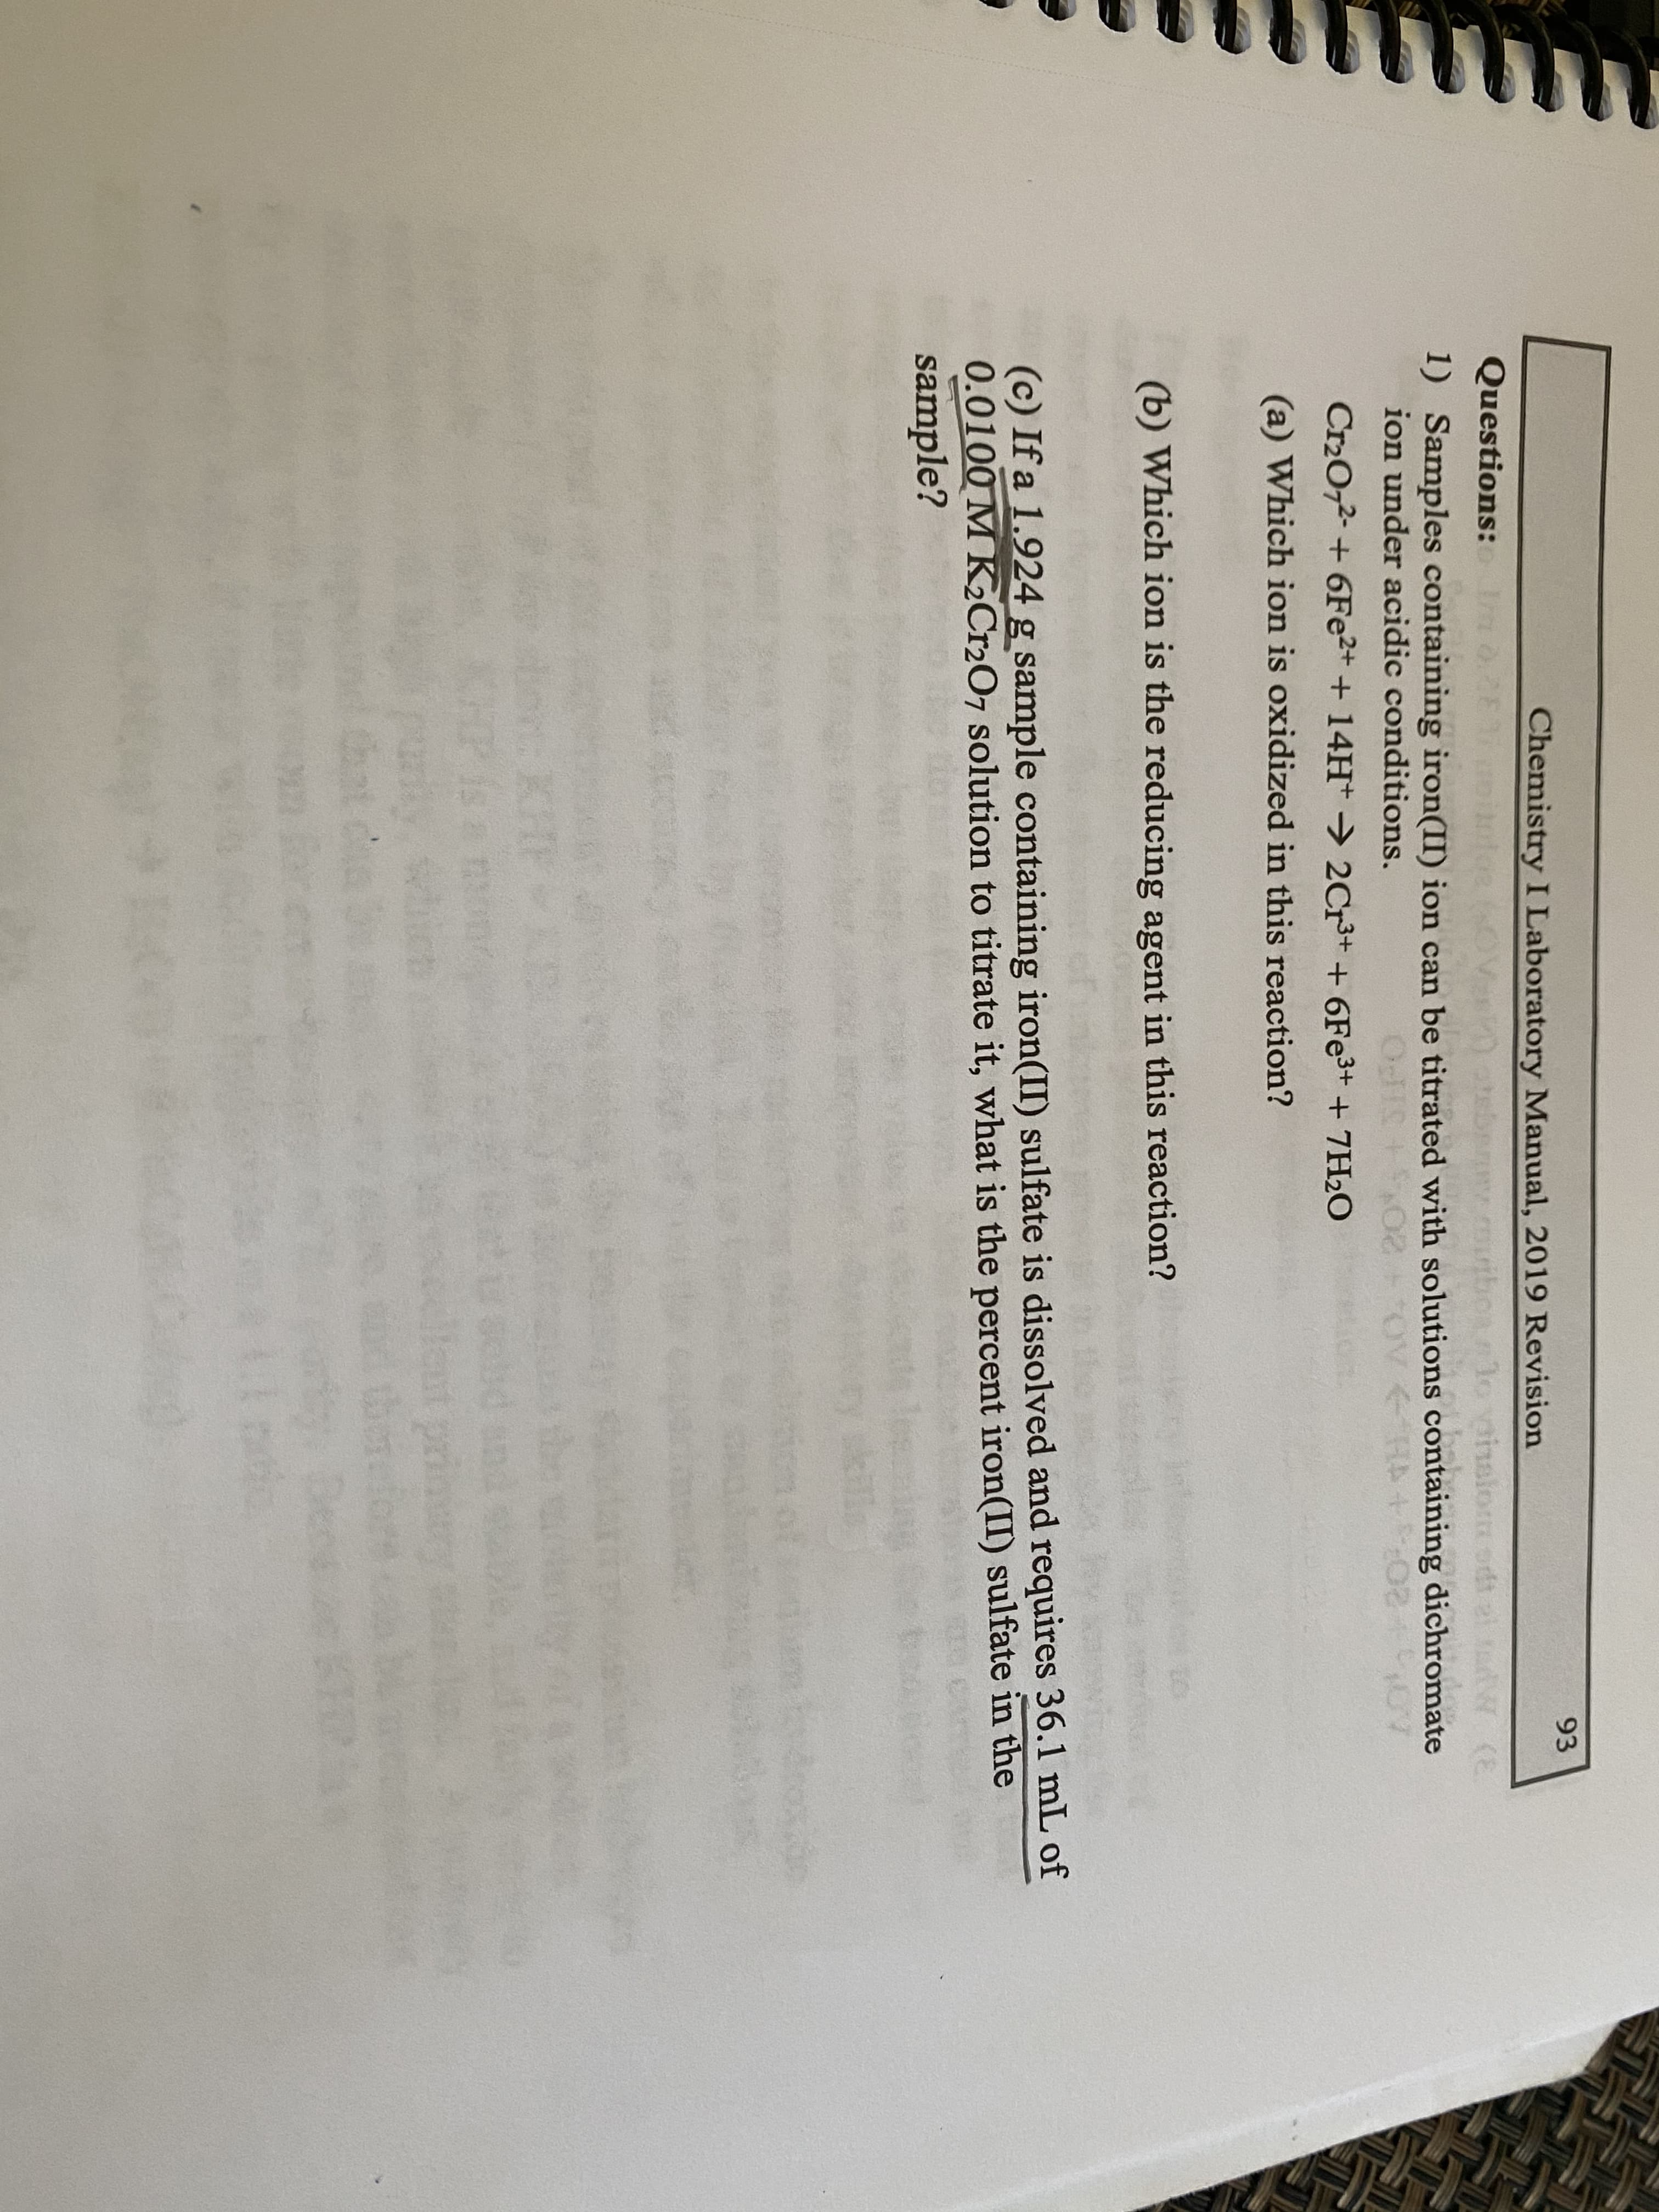 93
Chemistry I Laboratory Manual, 2019 Revision
Questions:
1o vaislom
(E
1) Samples containing iron(II) ion can be titrated with solutions containing dichromate
ion under acidic conditions.
OcHS
Cr20,2- + 6Fe2+ + 14H→ 2Cr³+ + 6FE3+ + 7H2O
(a) Which ion is oxidized in this reaction?
(b) Which ion is the reducing agent in this reaction?
(c) If a 1.924 g sample containing iron(II) sulfate is dissolved and requires 36.1 mL of
0.0100 M K2C12O7 solution to titrate it, what is the percent iron(II) sulfate in the
sample?
Broxide
on KHF
HP is a on
nt pri
